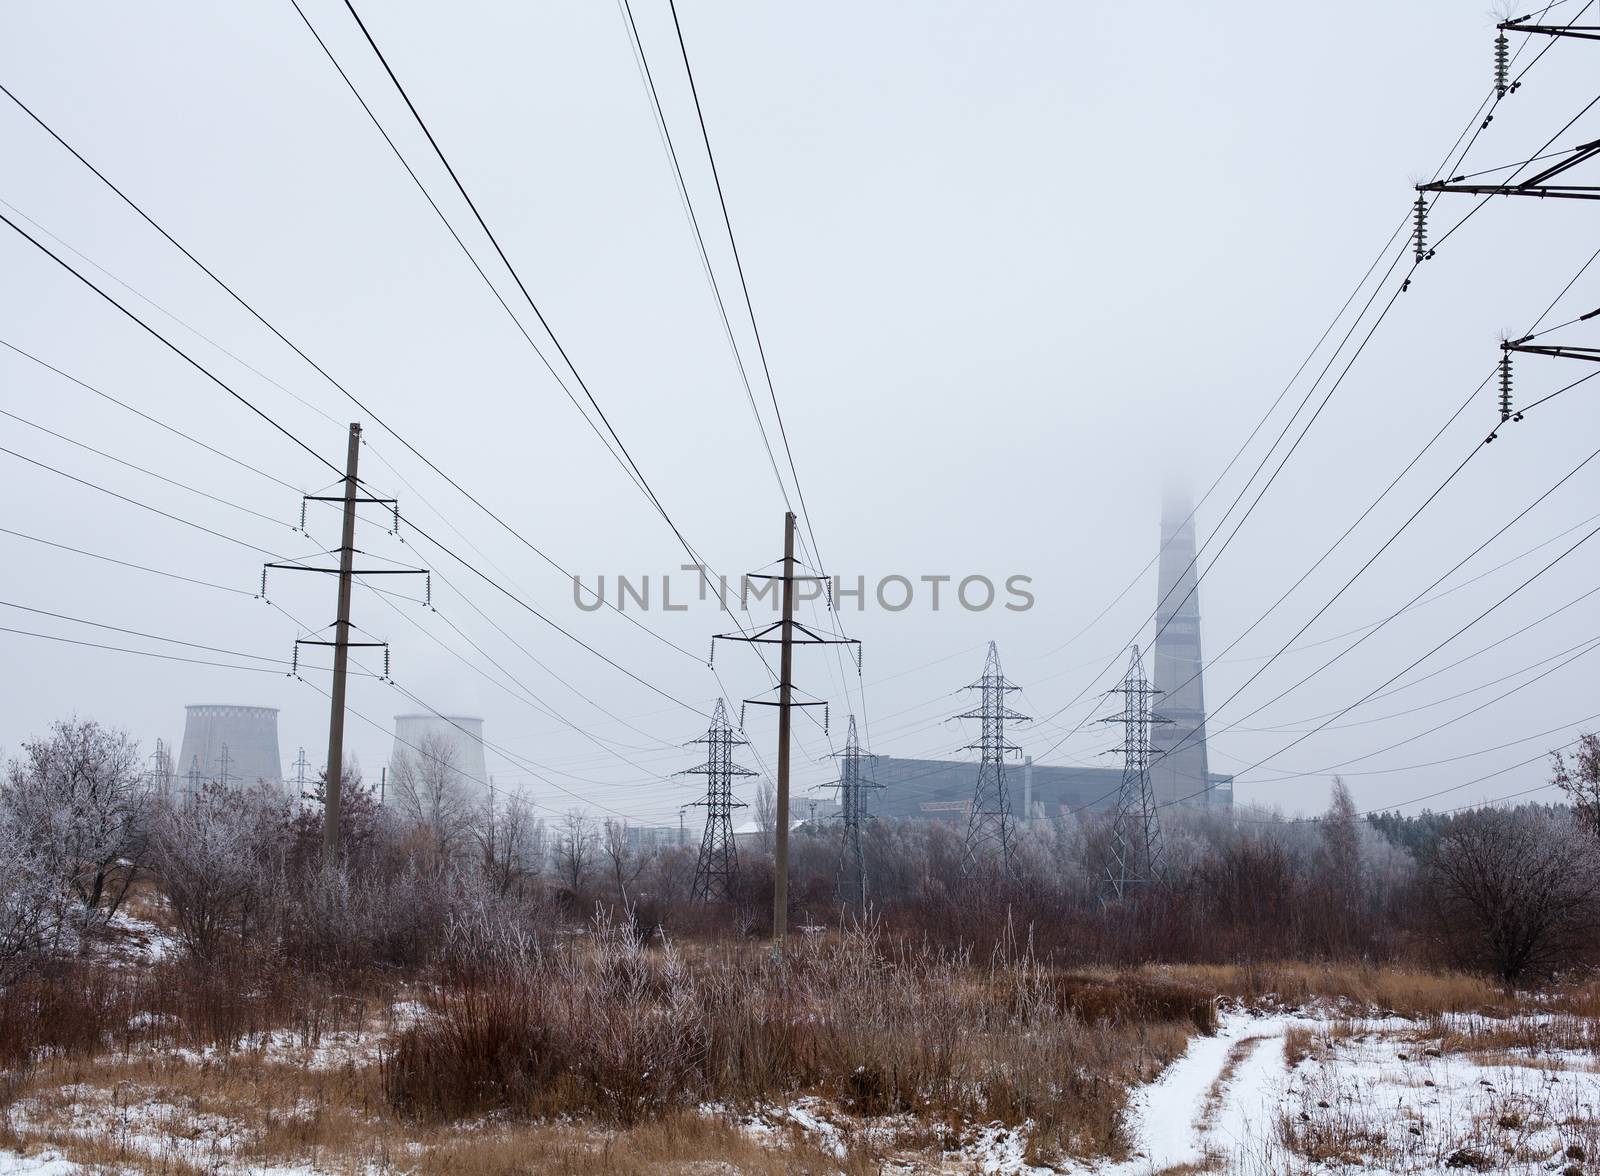 Electricity pylons, power lines, smoke stack and cooling tower of the cogeneration plant near Kyiv (Ukraine).